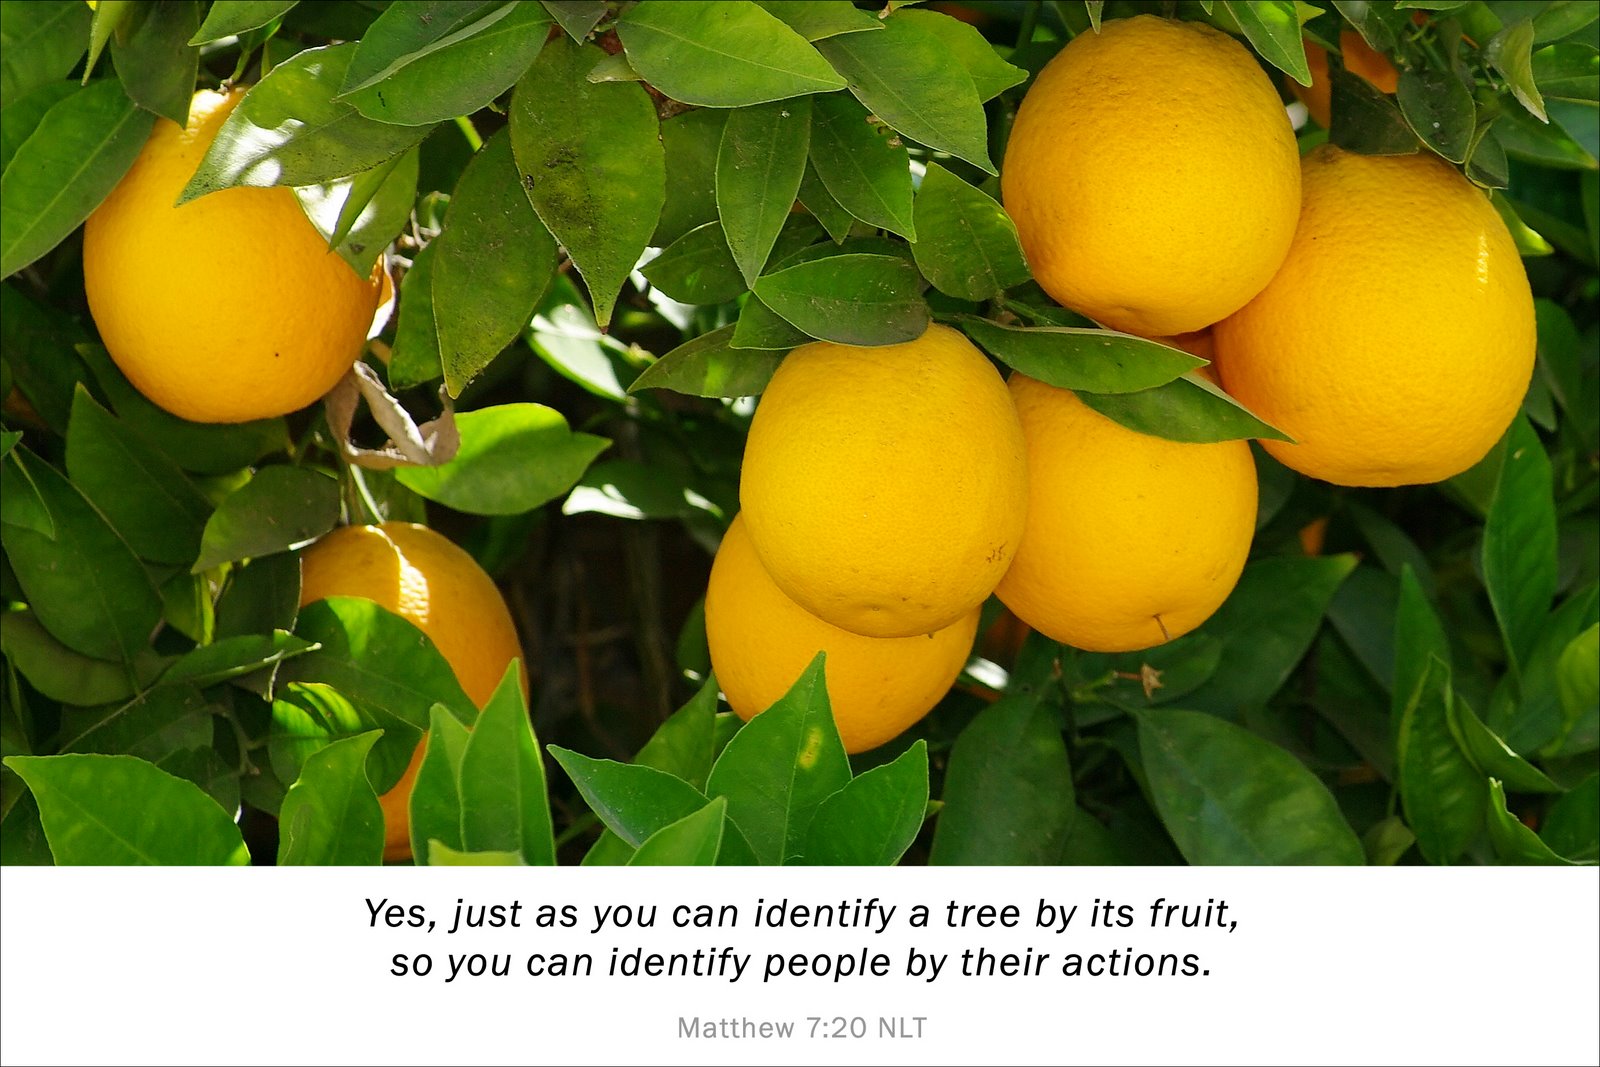 Yes, just as you can identify a tree by its fruit, so you can identify